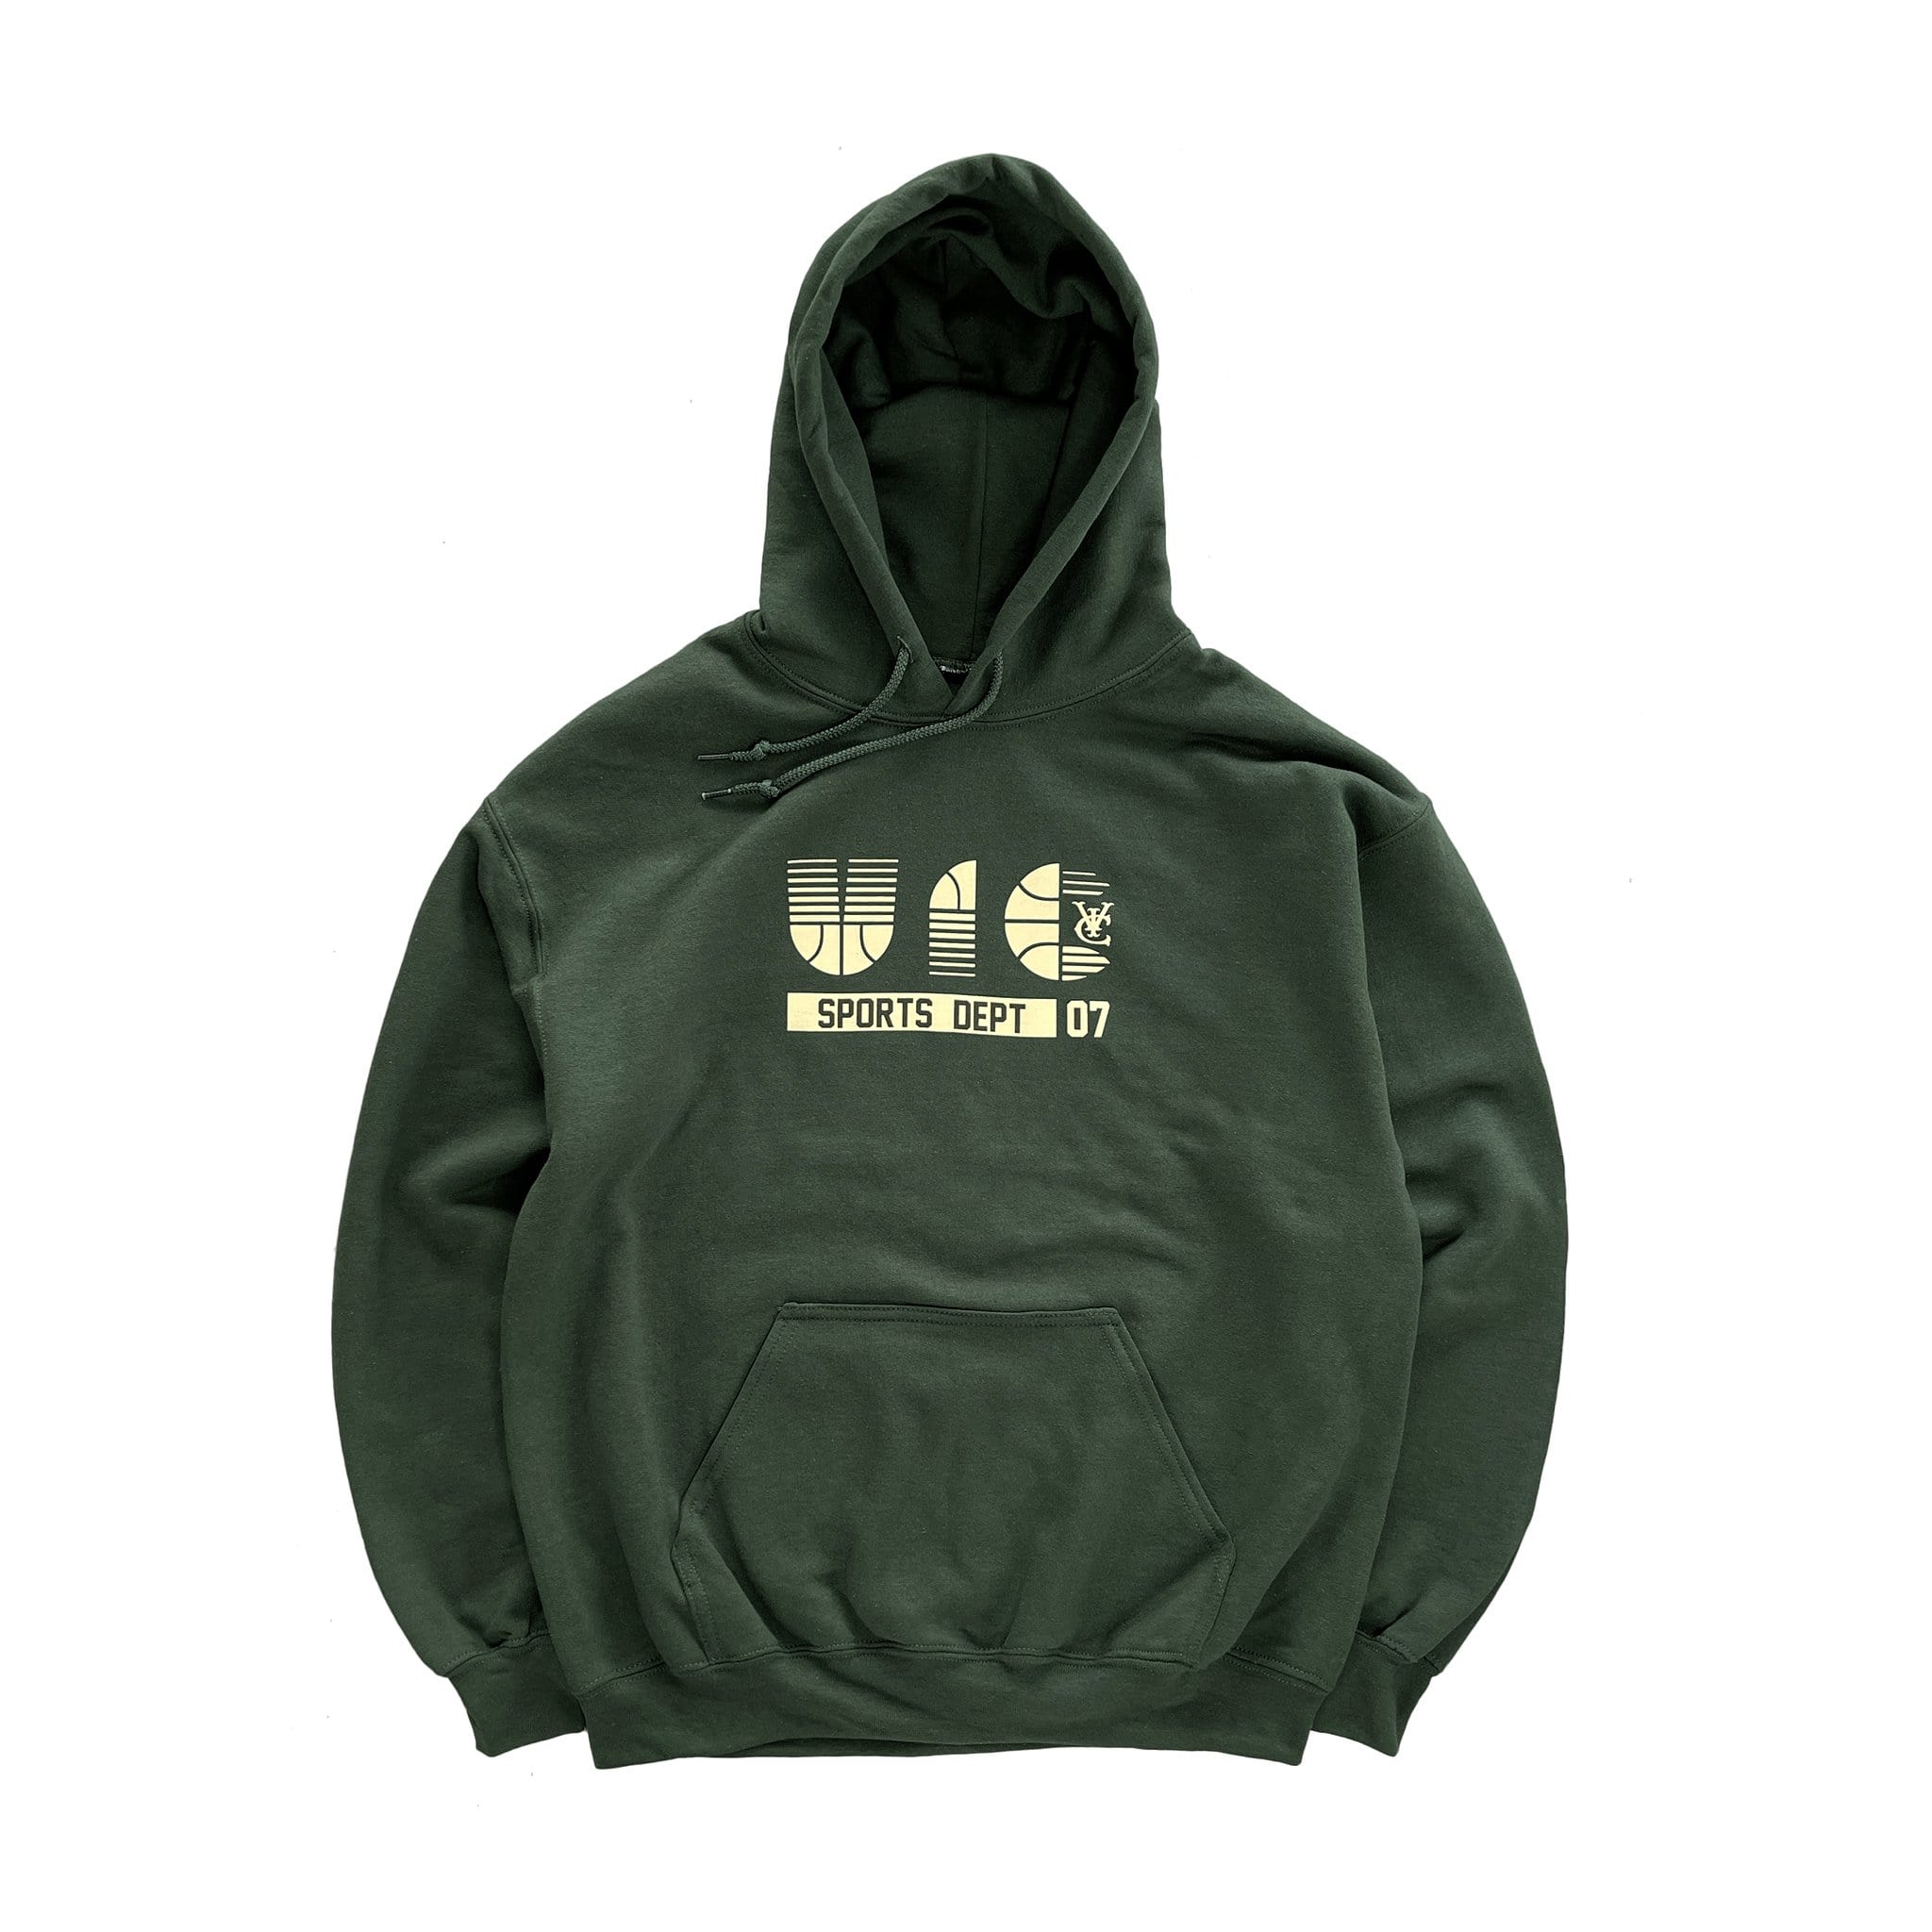 Premium quality sweatshirt hoodie in by New Zealand skate and streetwear clothing label VIC Apparel. Classic boxy fit, Dropped shoulder, Mid-weight, 271 g/m2, 100% Cotton, Logo screenprint on front. 